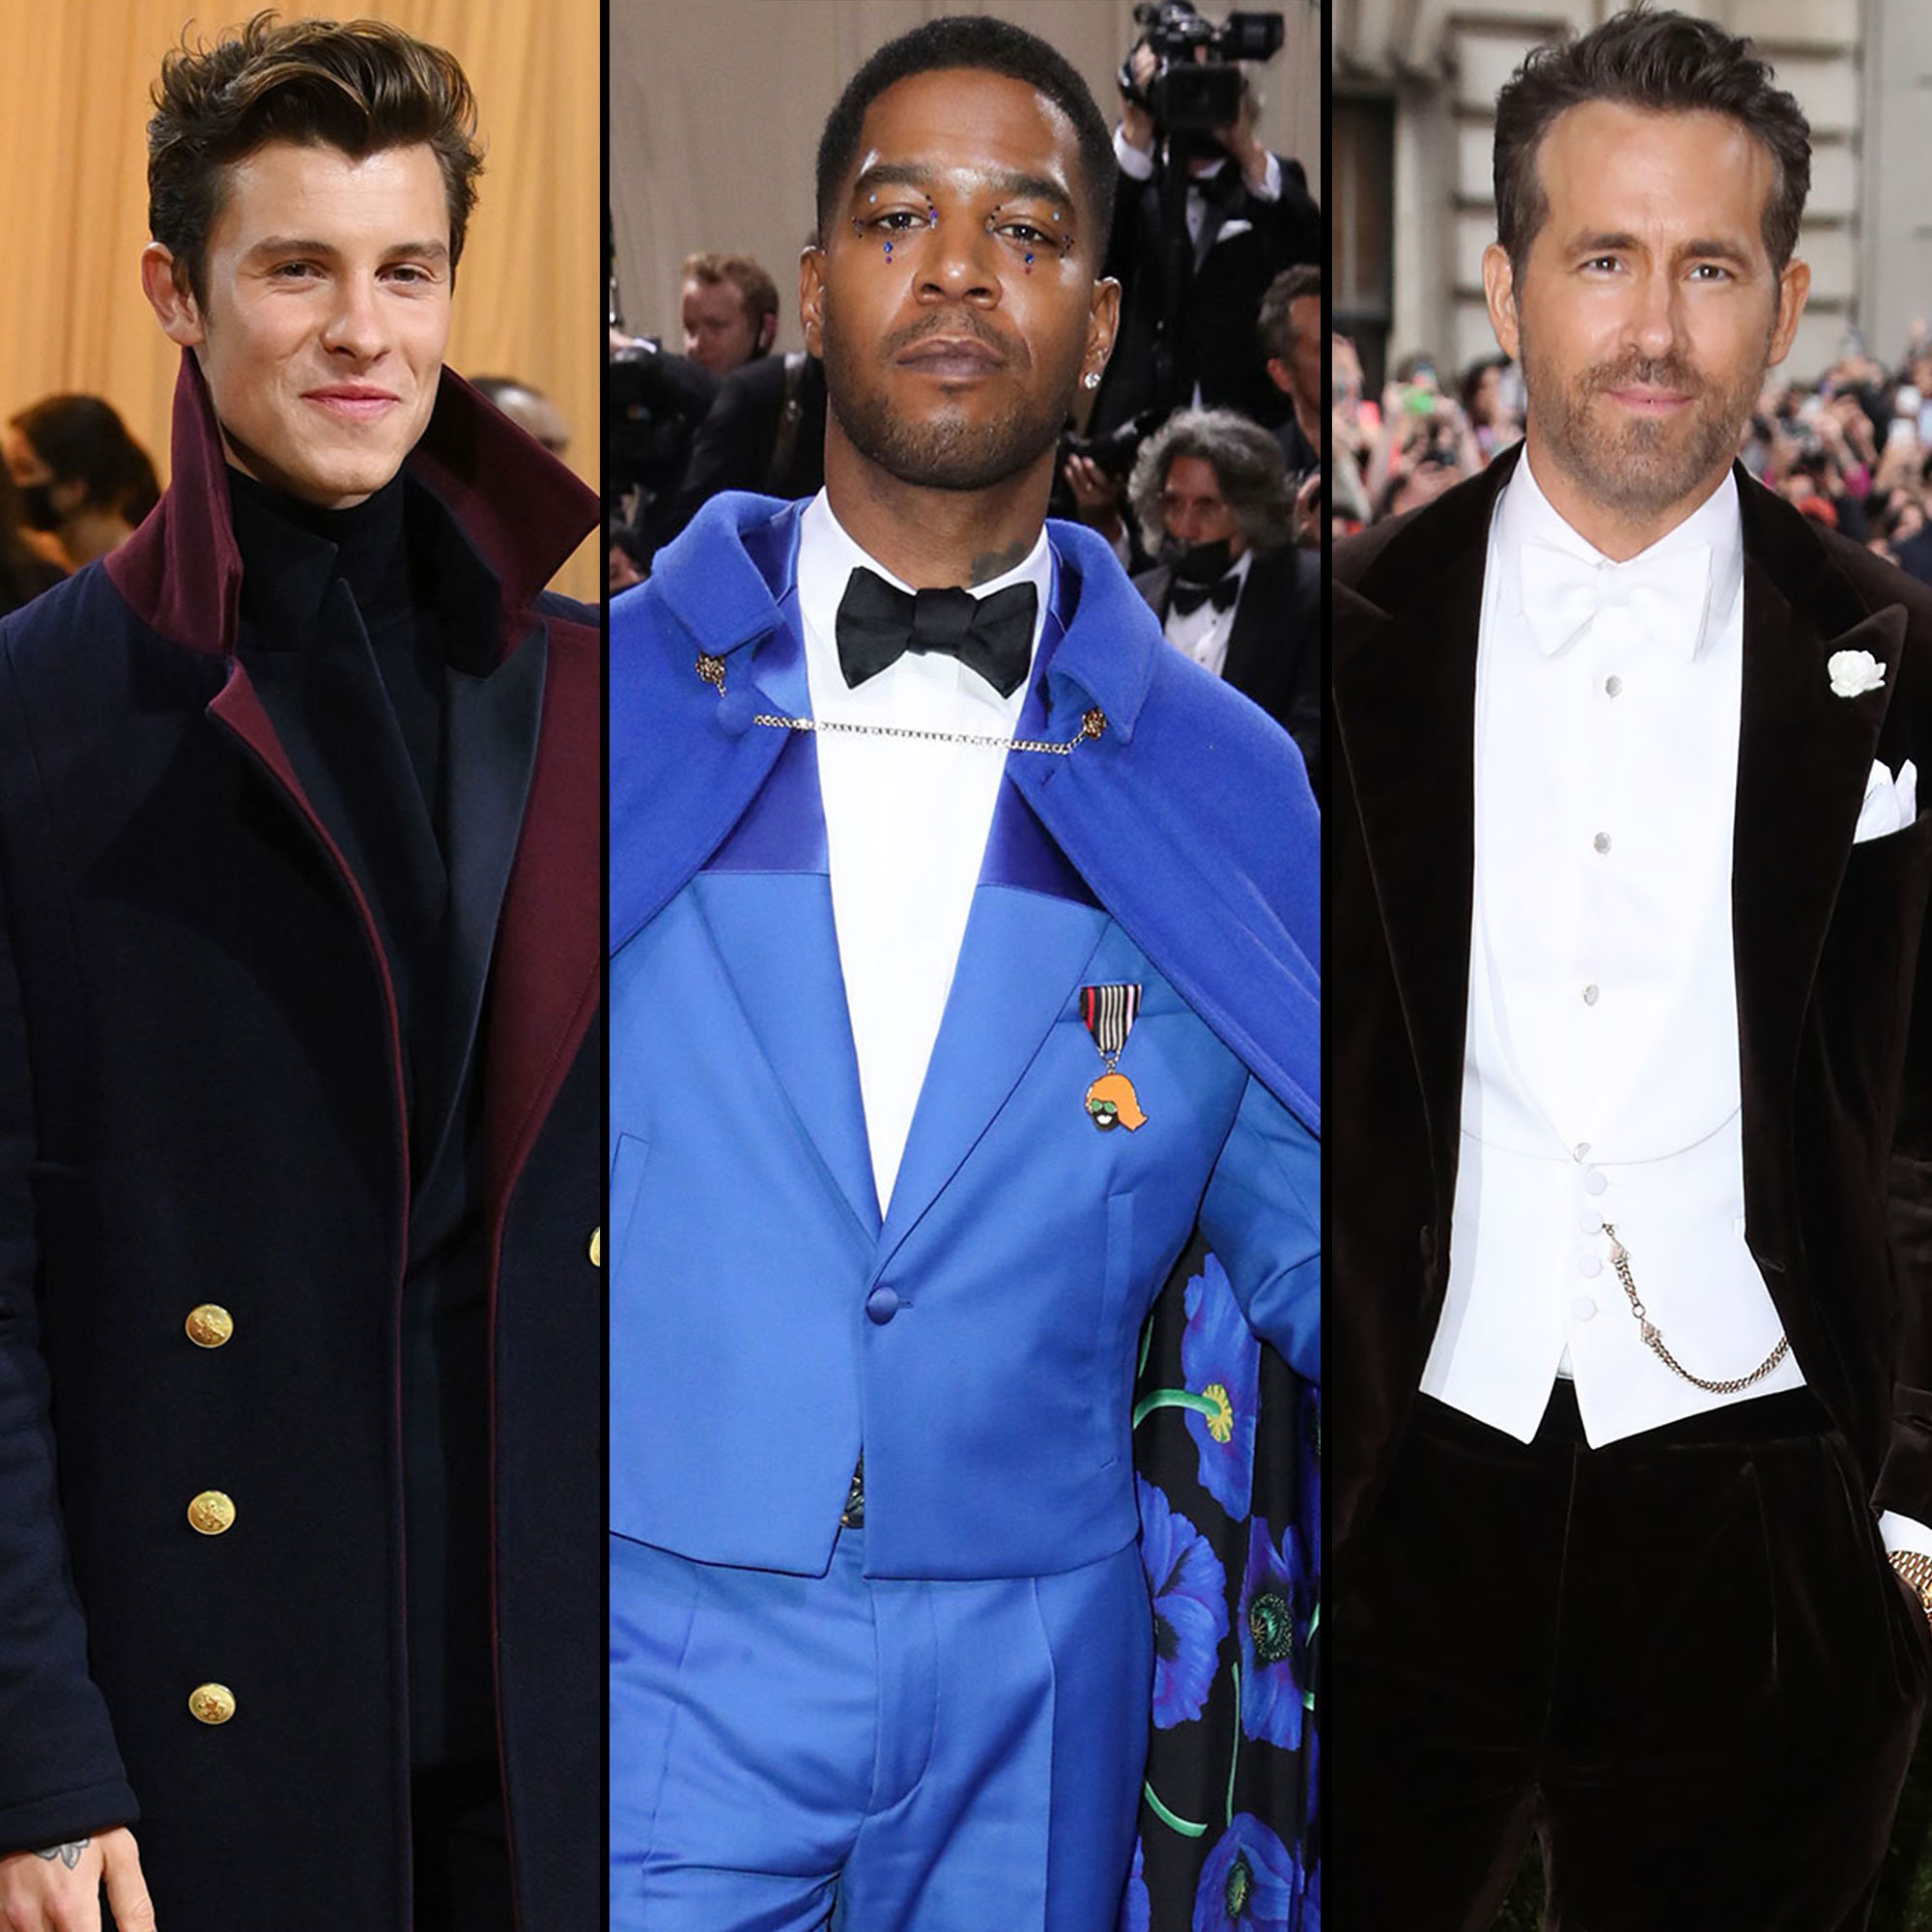 Met Gala 2022 Hottest Men in Tuxedos, Suits and More